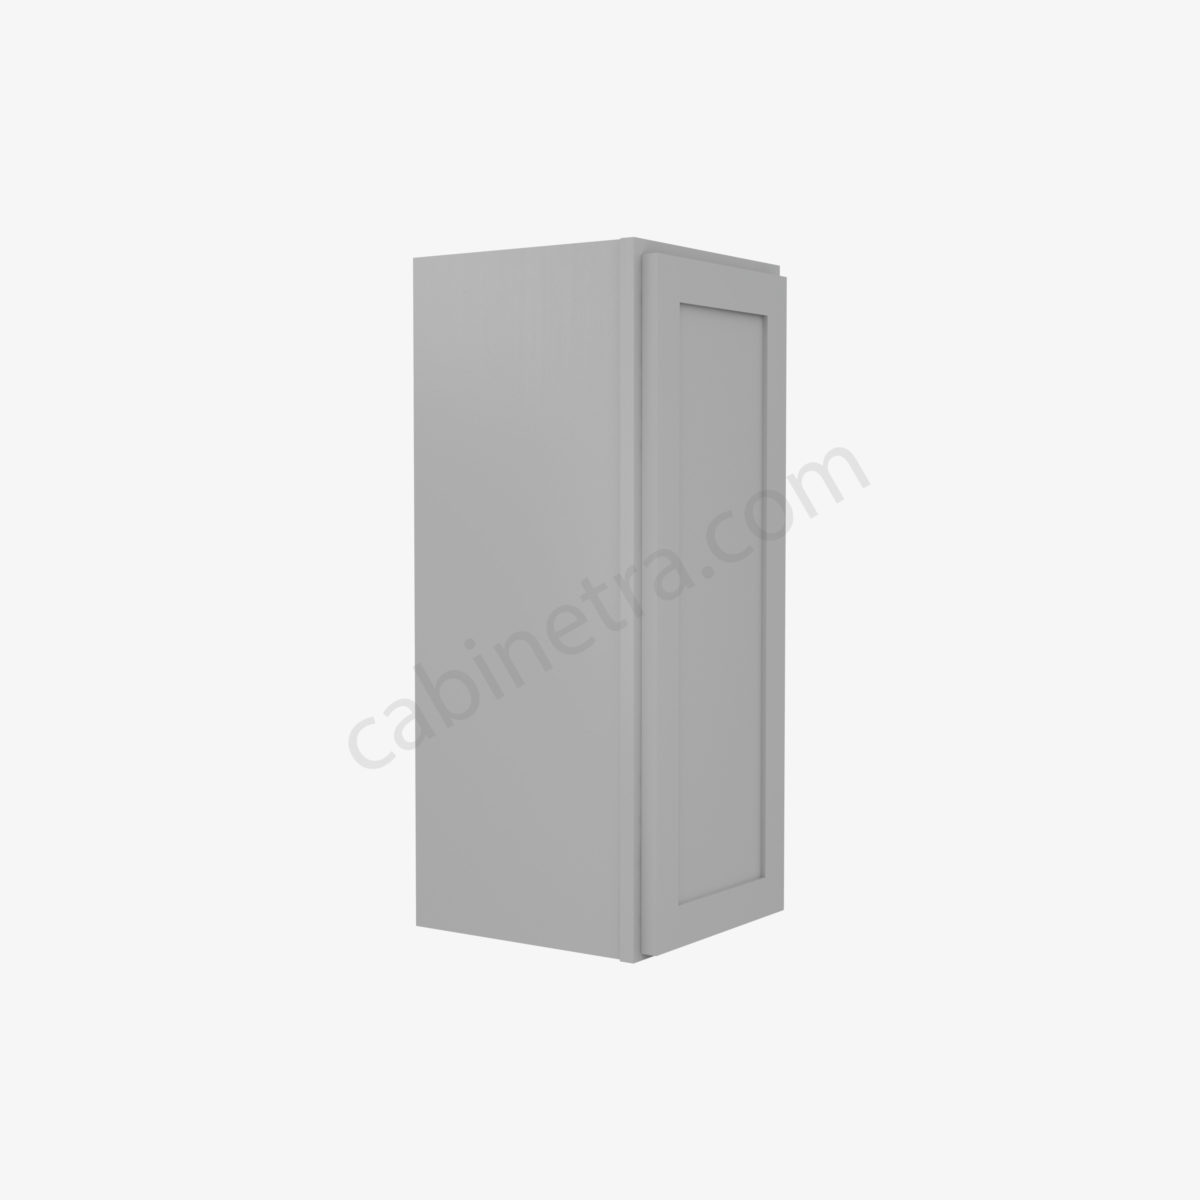 AB W1230 4 Forevermark Lait Gray Shaker Cabinetra scaled